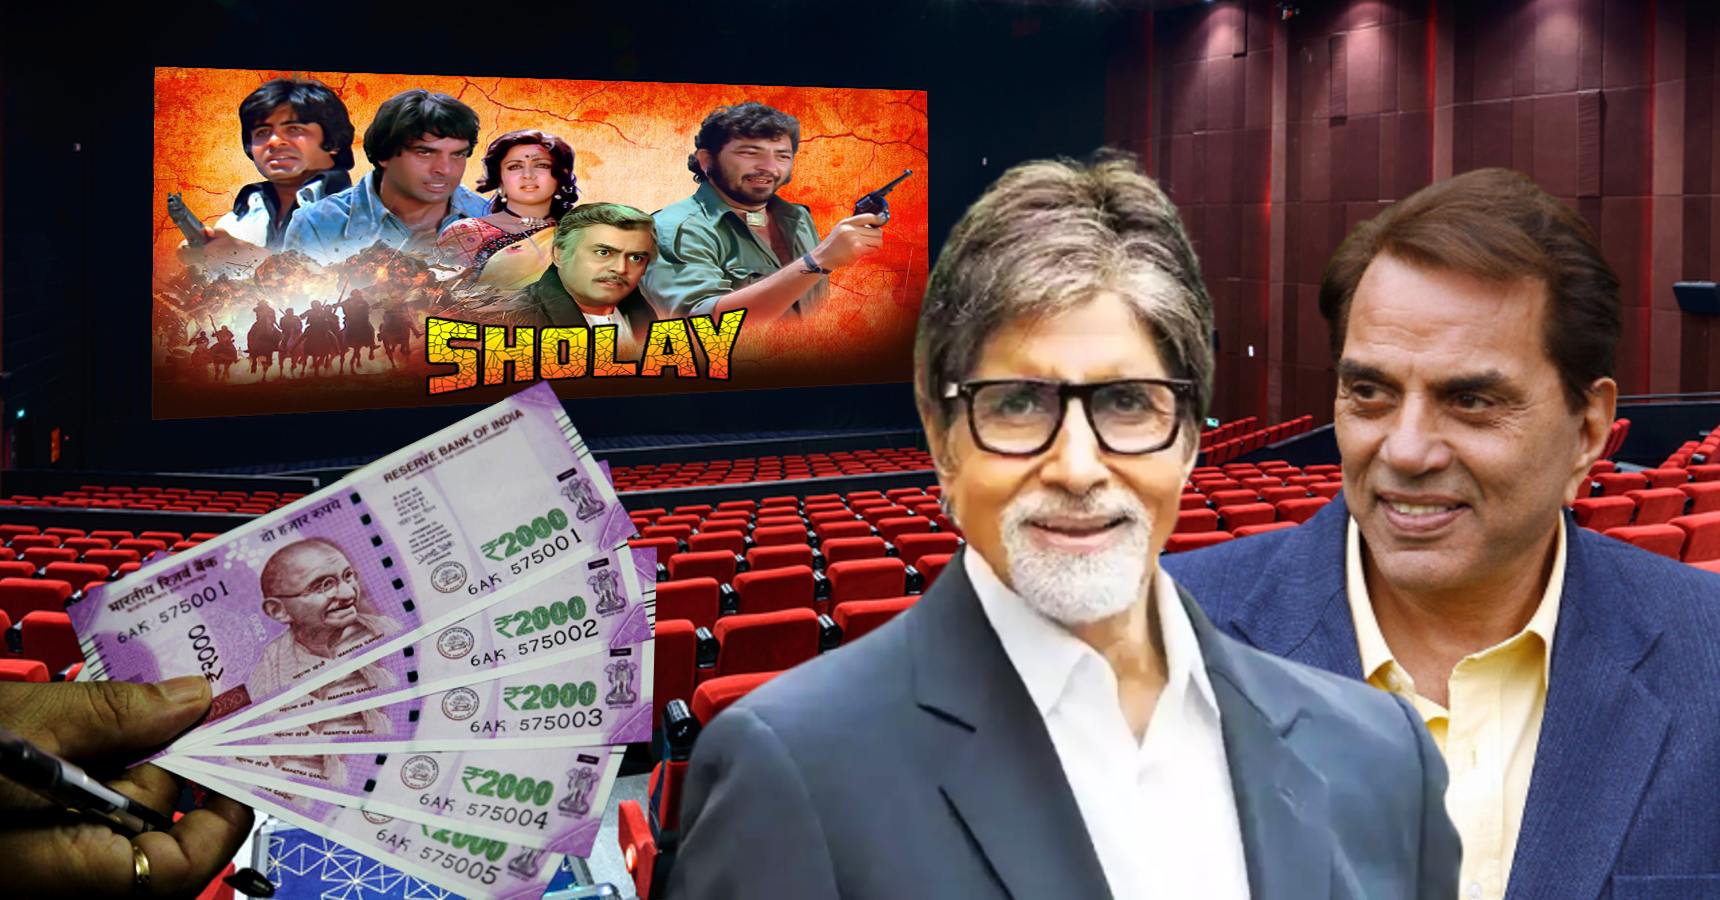 Sholay ticket sold in 2 rupees box office collection was 35 Crore